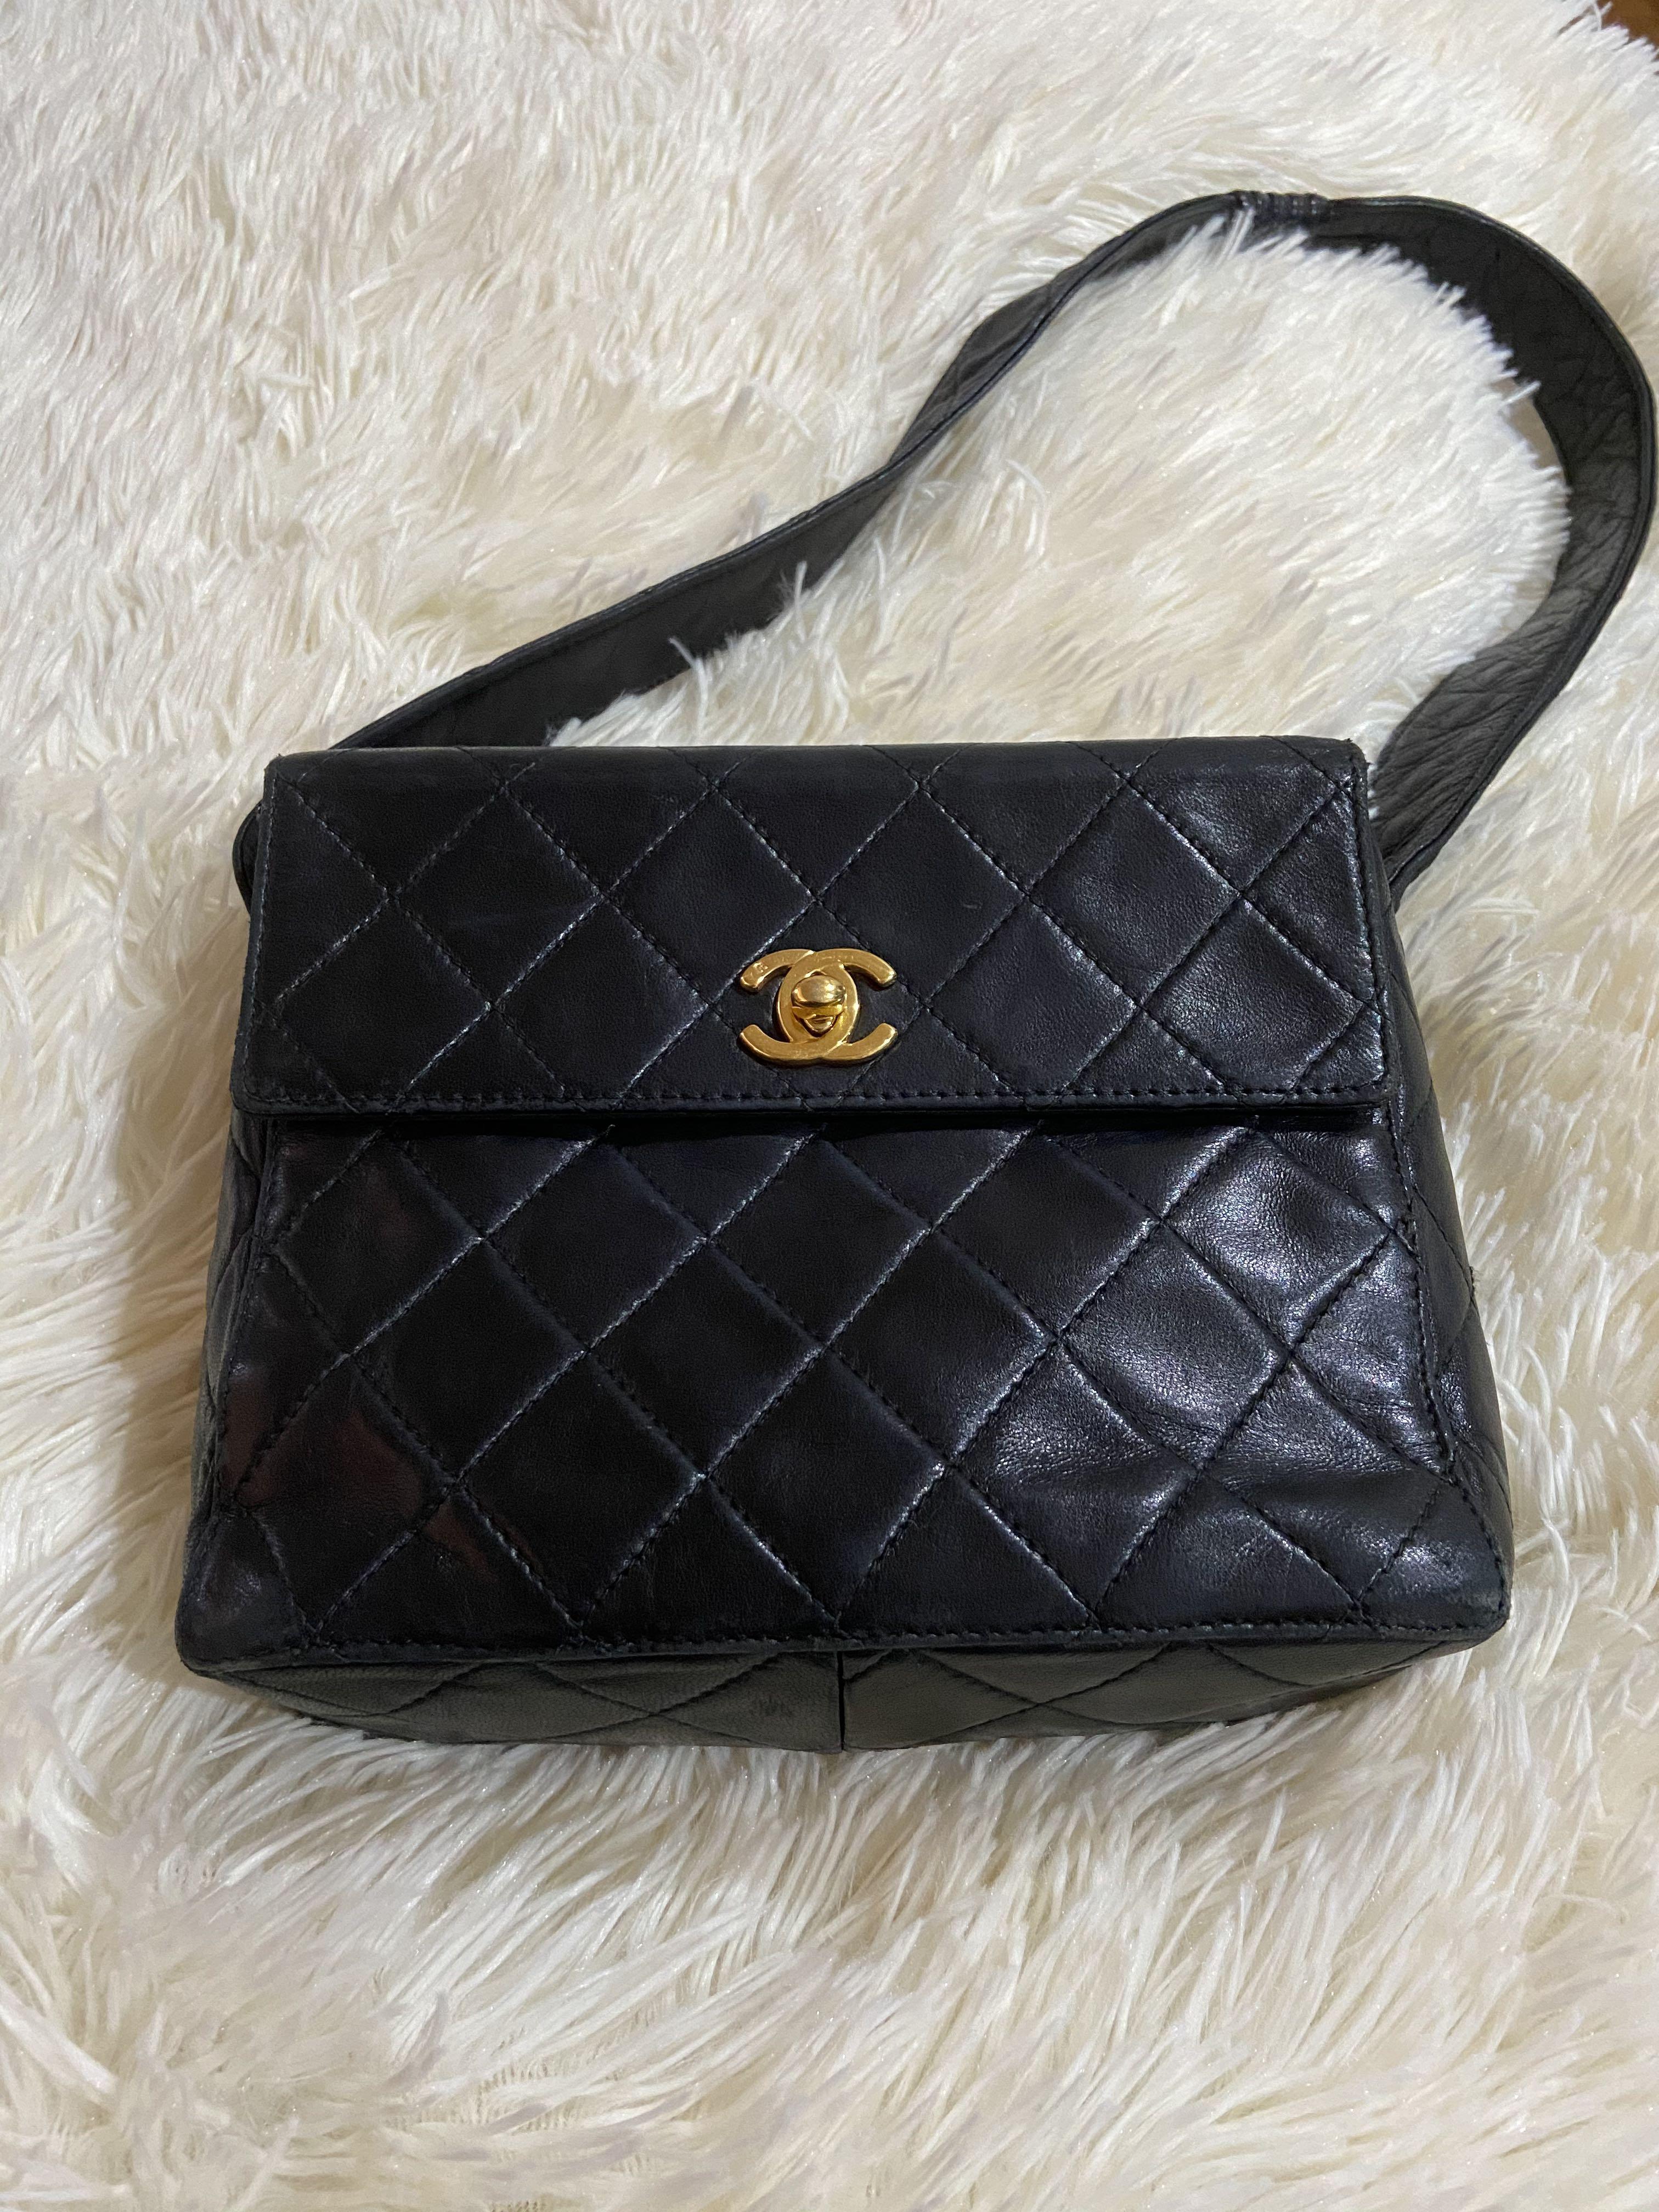 Vintage Chanel Black Quilted Jumbo Classic Flap Bag Authentic PreOwn   The Lady Bag